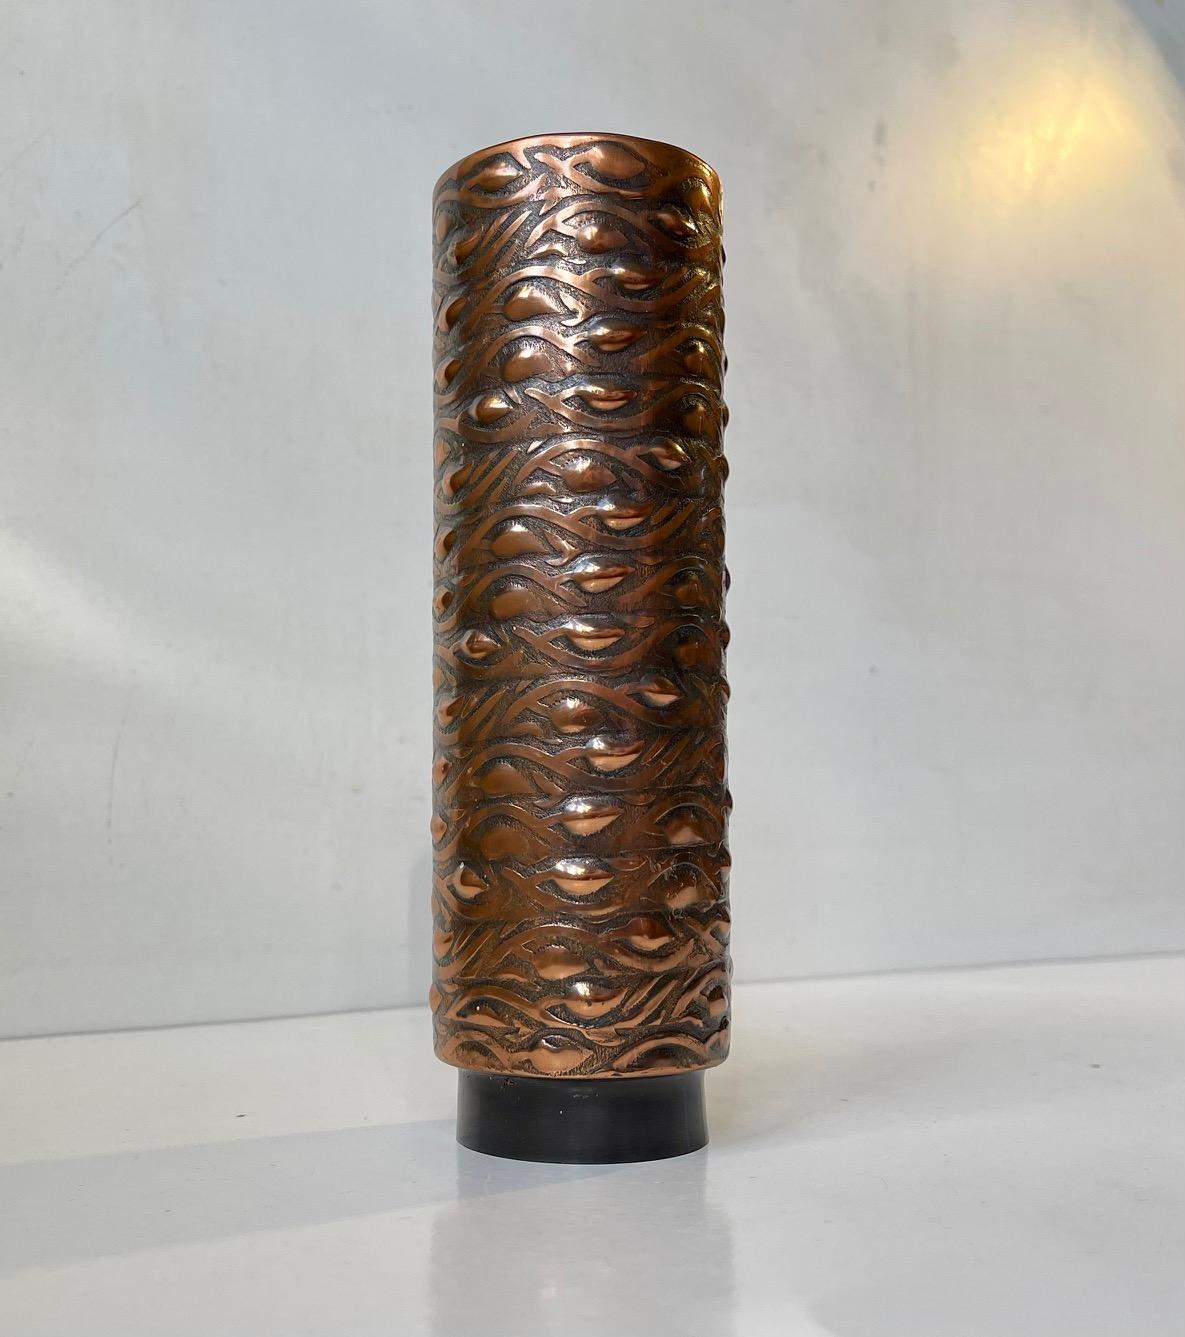 A sculptural cylindrical vase in hand embossed patinated copper. It displays all the right elements of Scandinavian Brutalism. The floral relief pattern resembles some of Axel Salto's work. Anonymous Scandinavian metal worker/artist circa 1970. It